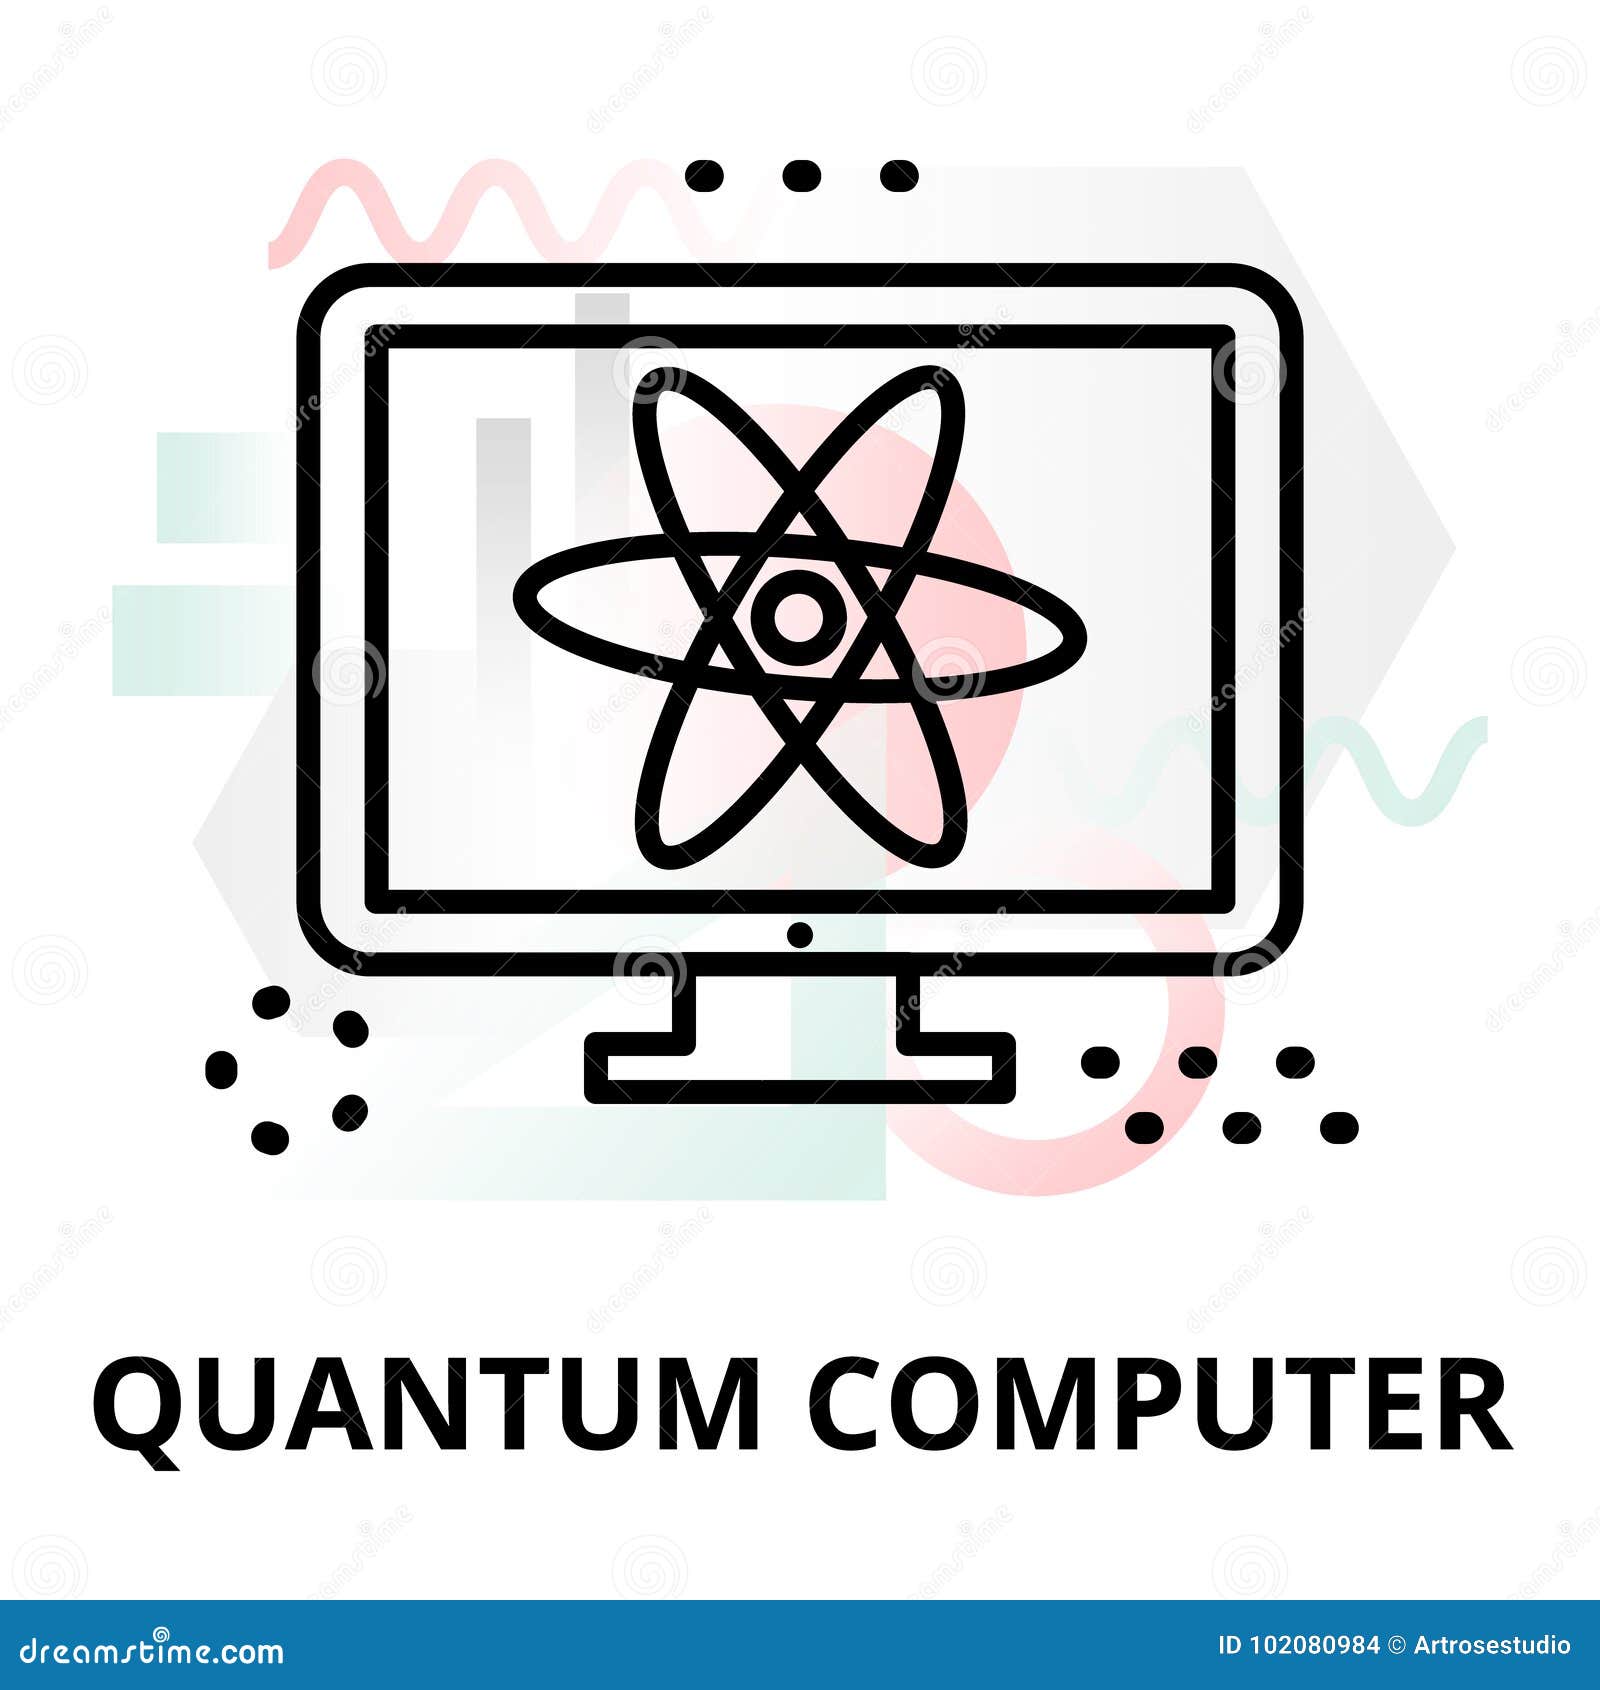 abstract icon of quantum computer